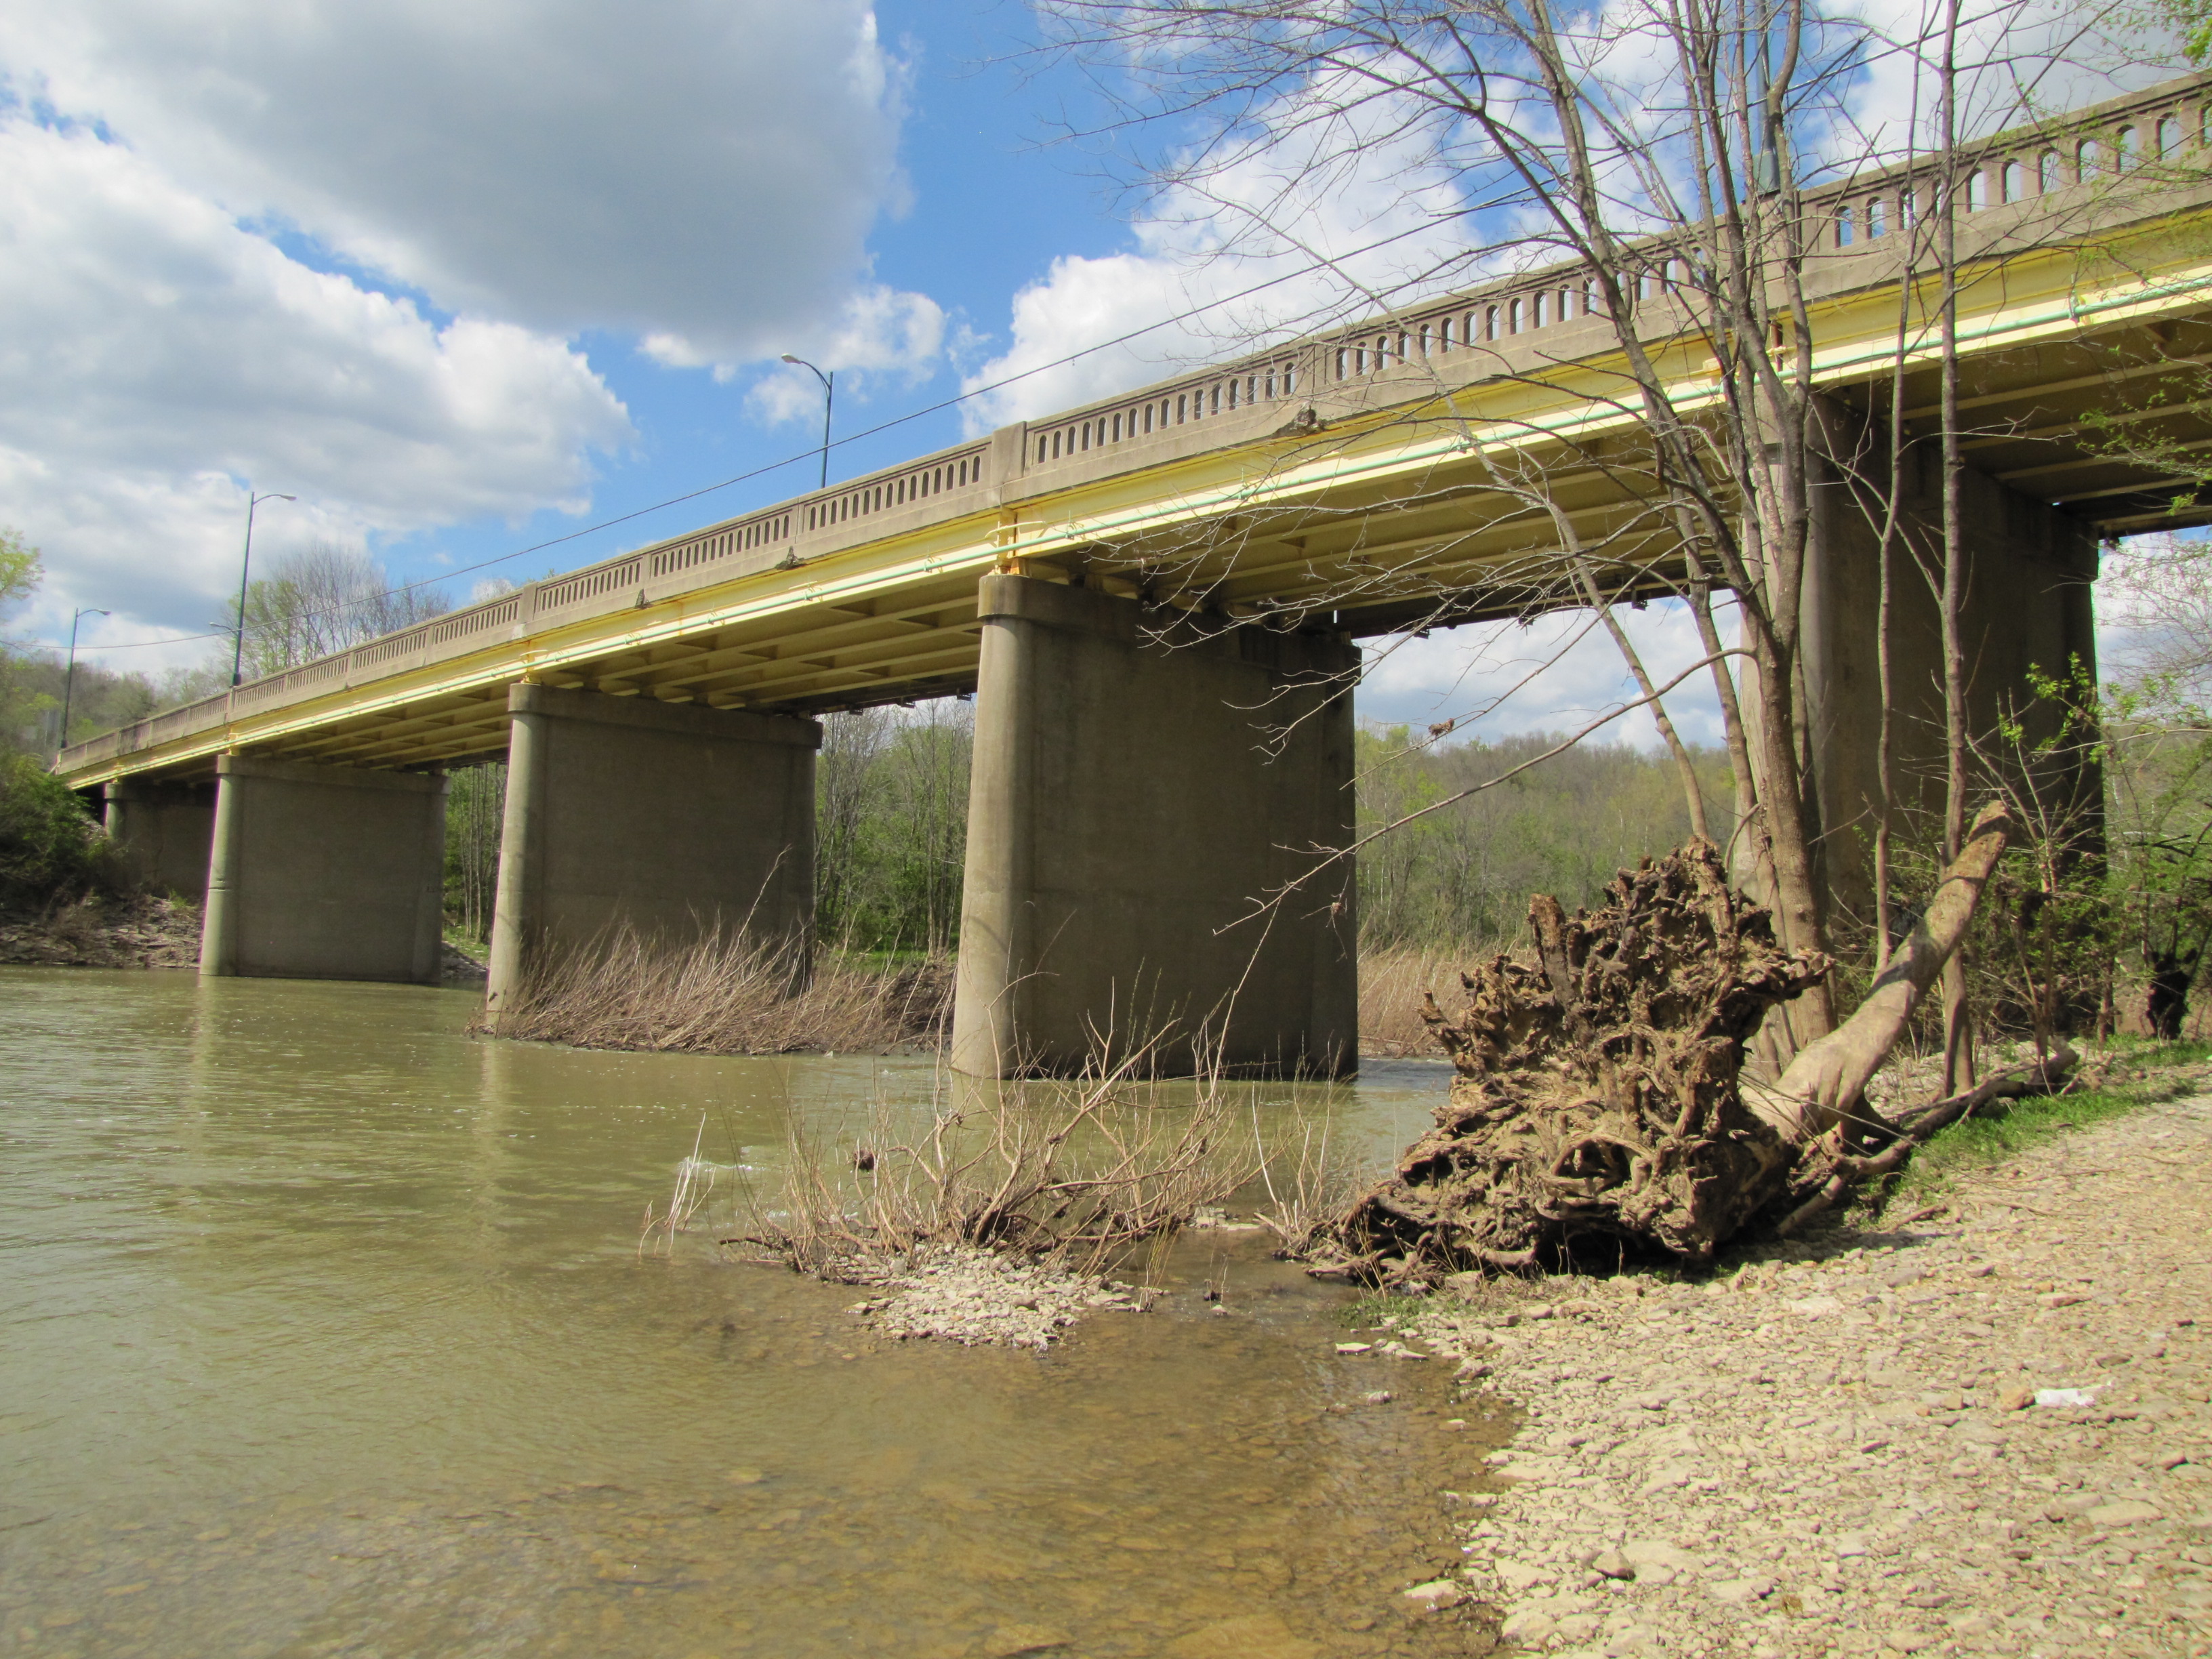 The US 27 bridge crossing located at the Pendleton Co. Athletic Park.